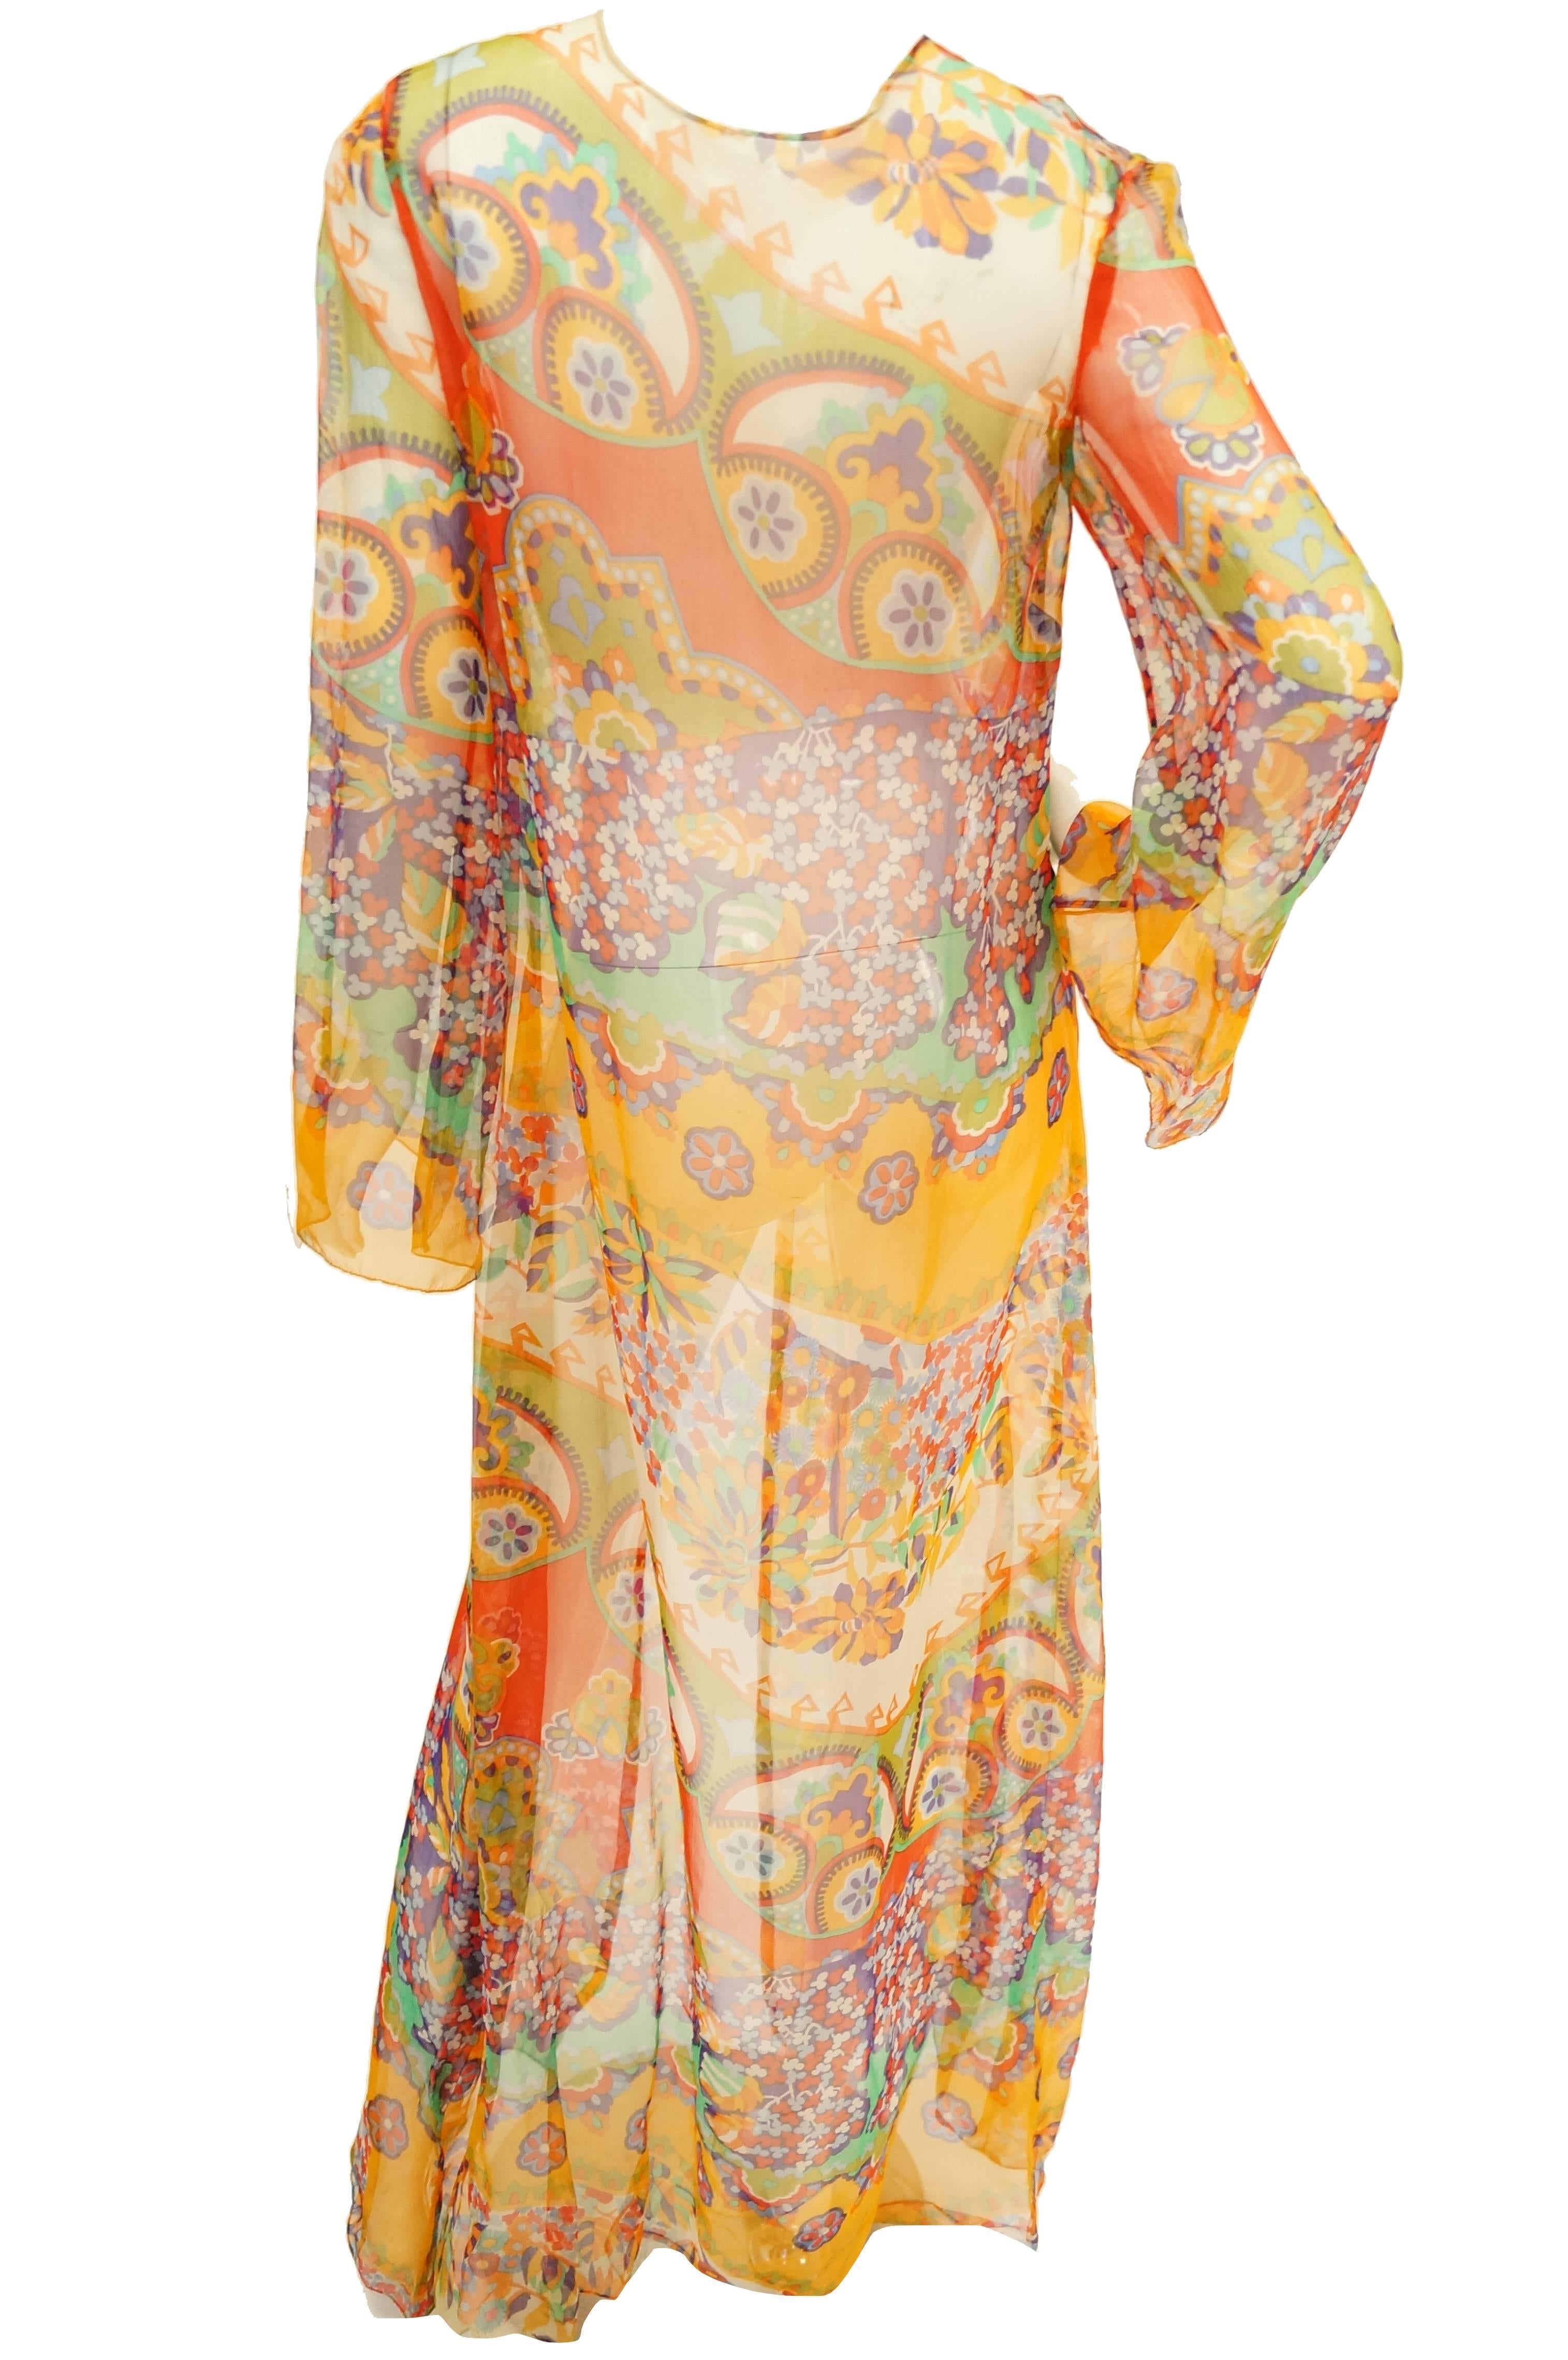 1970s Sheer Polychrome Psychedelic Floral Boho Caftan/Tunic /Cover Up 3